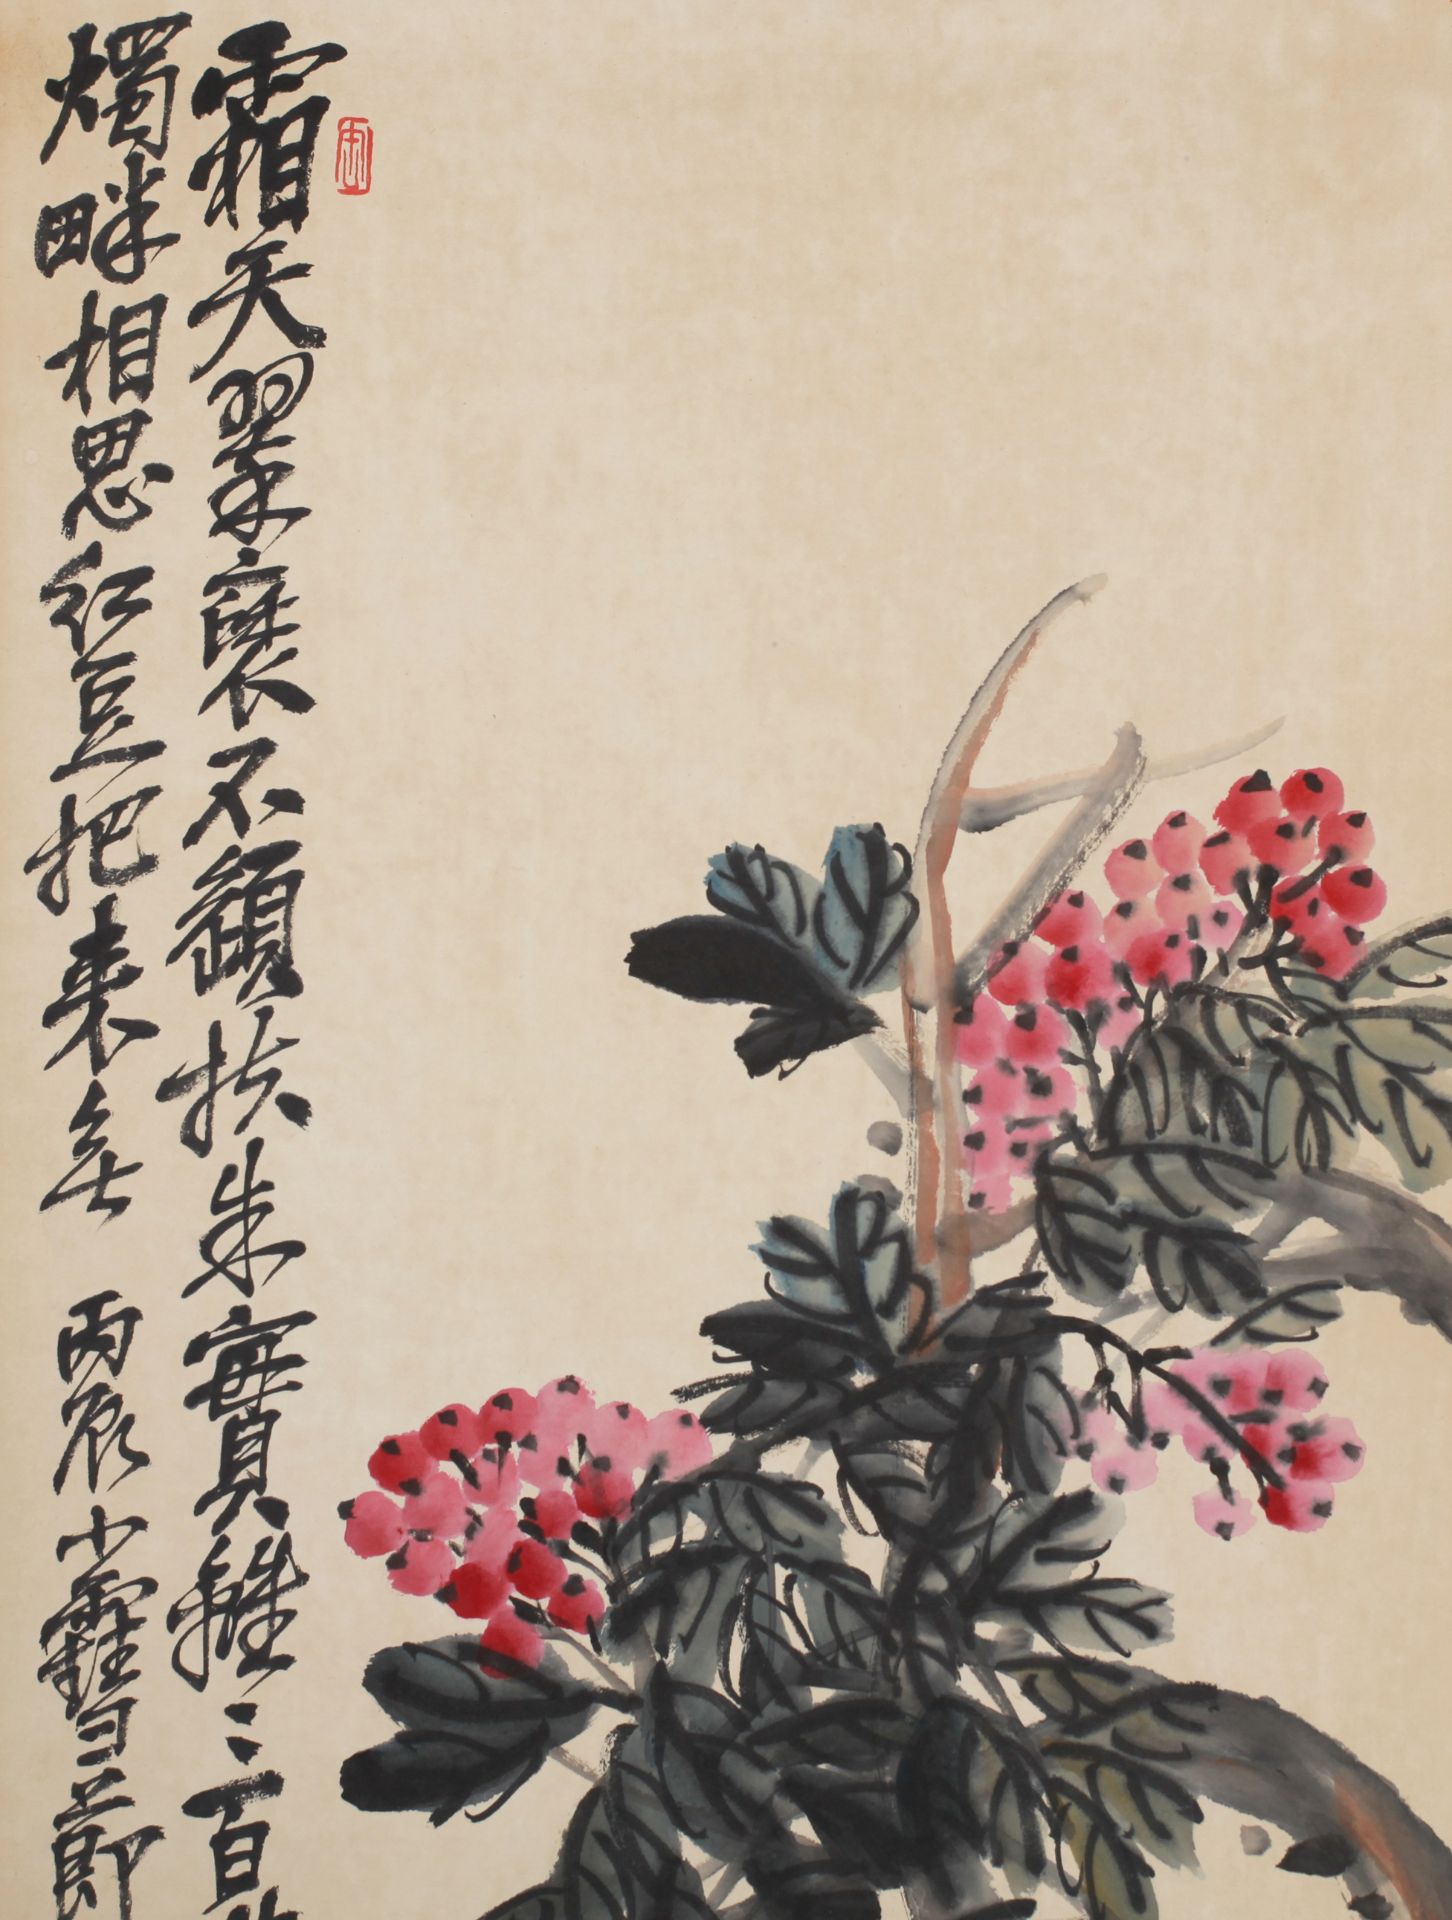 A Chinese Scroll Painting By Wu Changshuo - Image 5 of 10